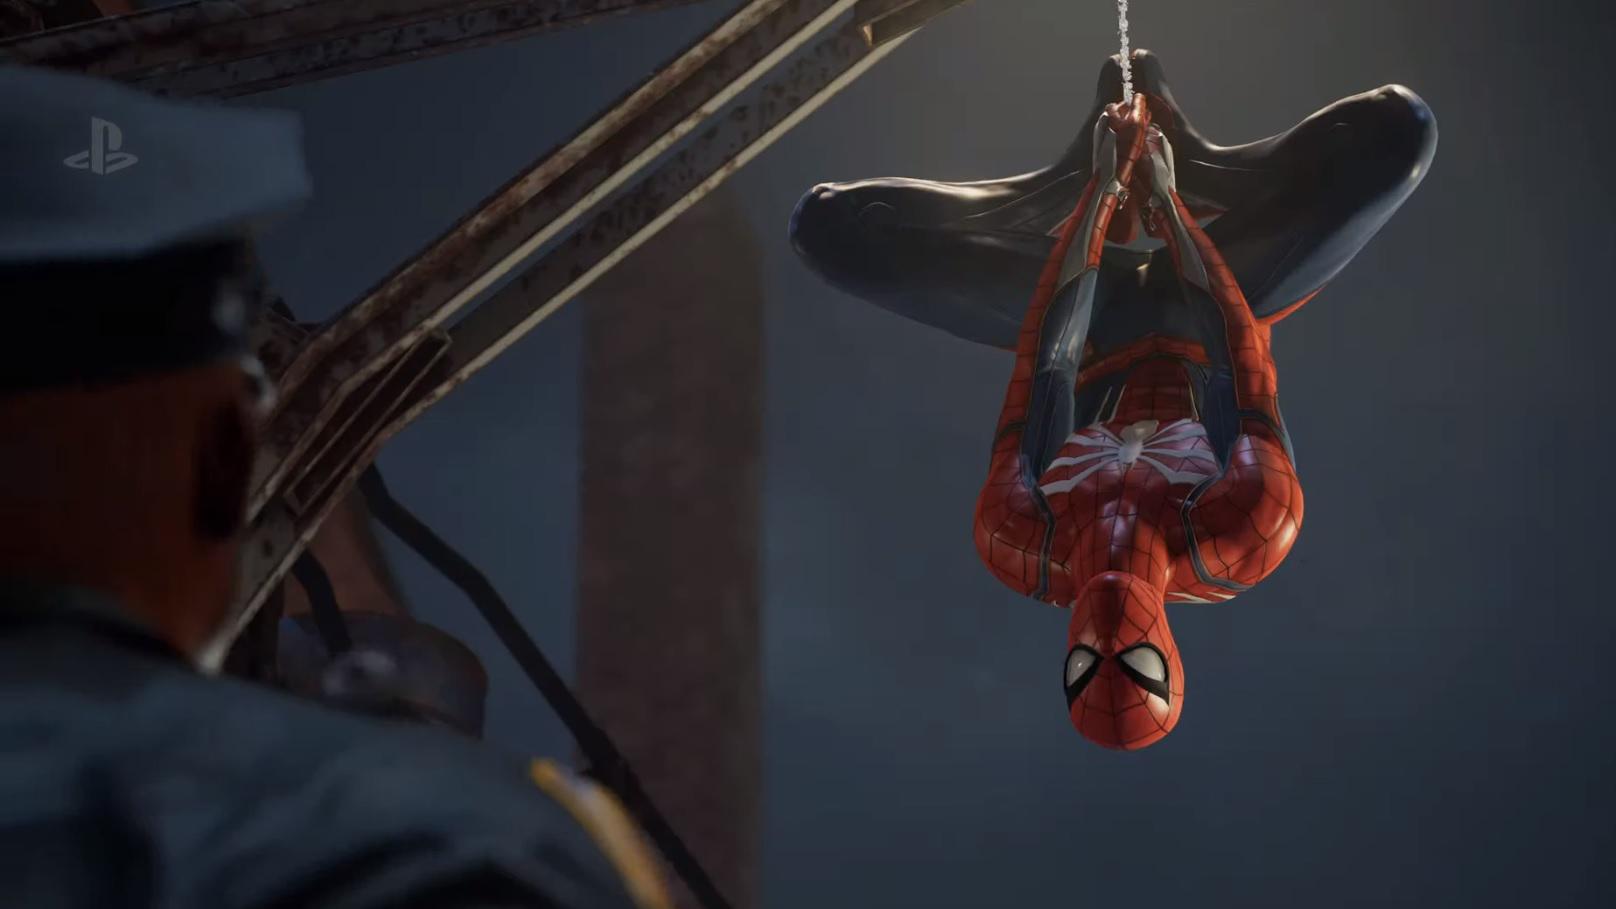 Spider-Man edition PS4 Pro swings into San Diego Comic-Con